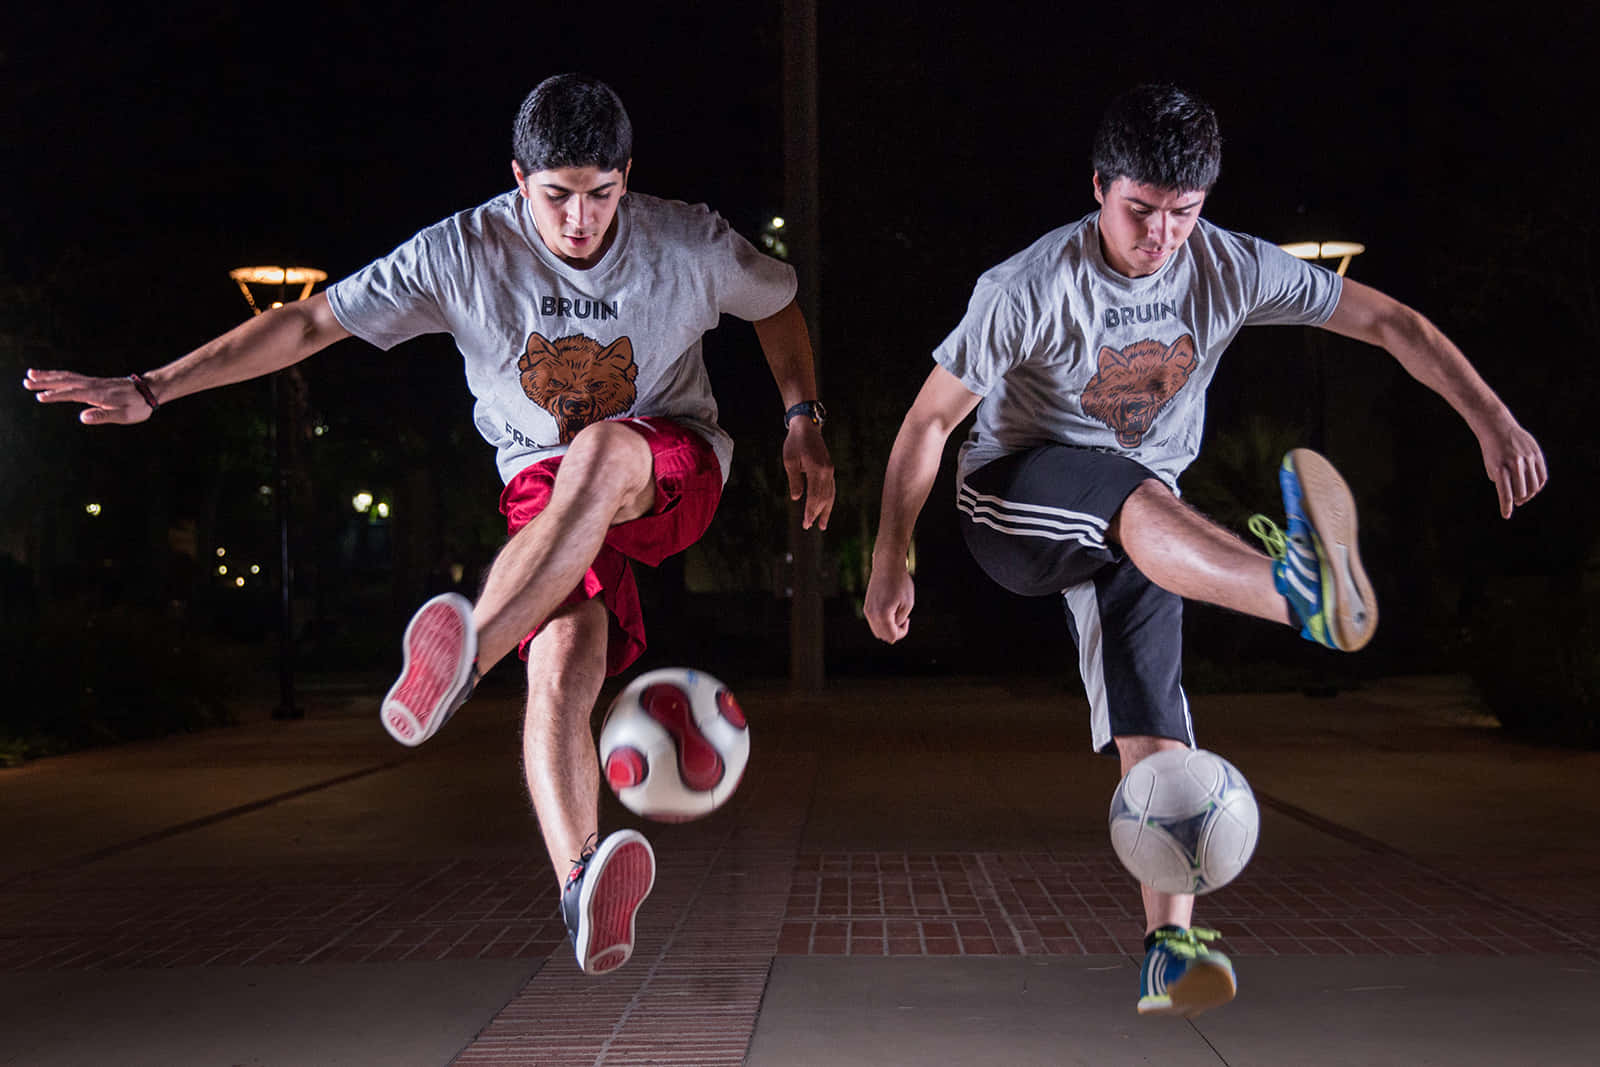 Caption: Kinetic Artistry - Freeze Frame Of A Freestyle Soccer Prodigy Wallpaper